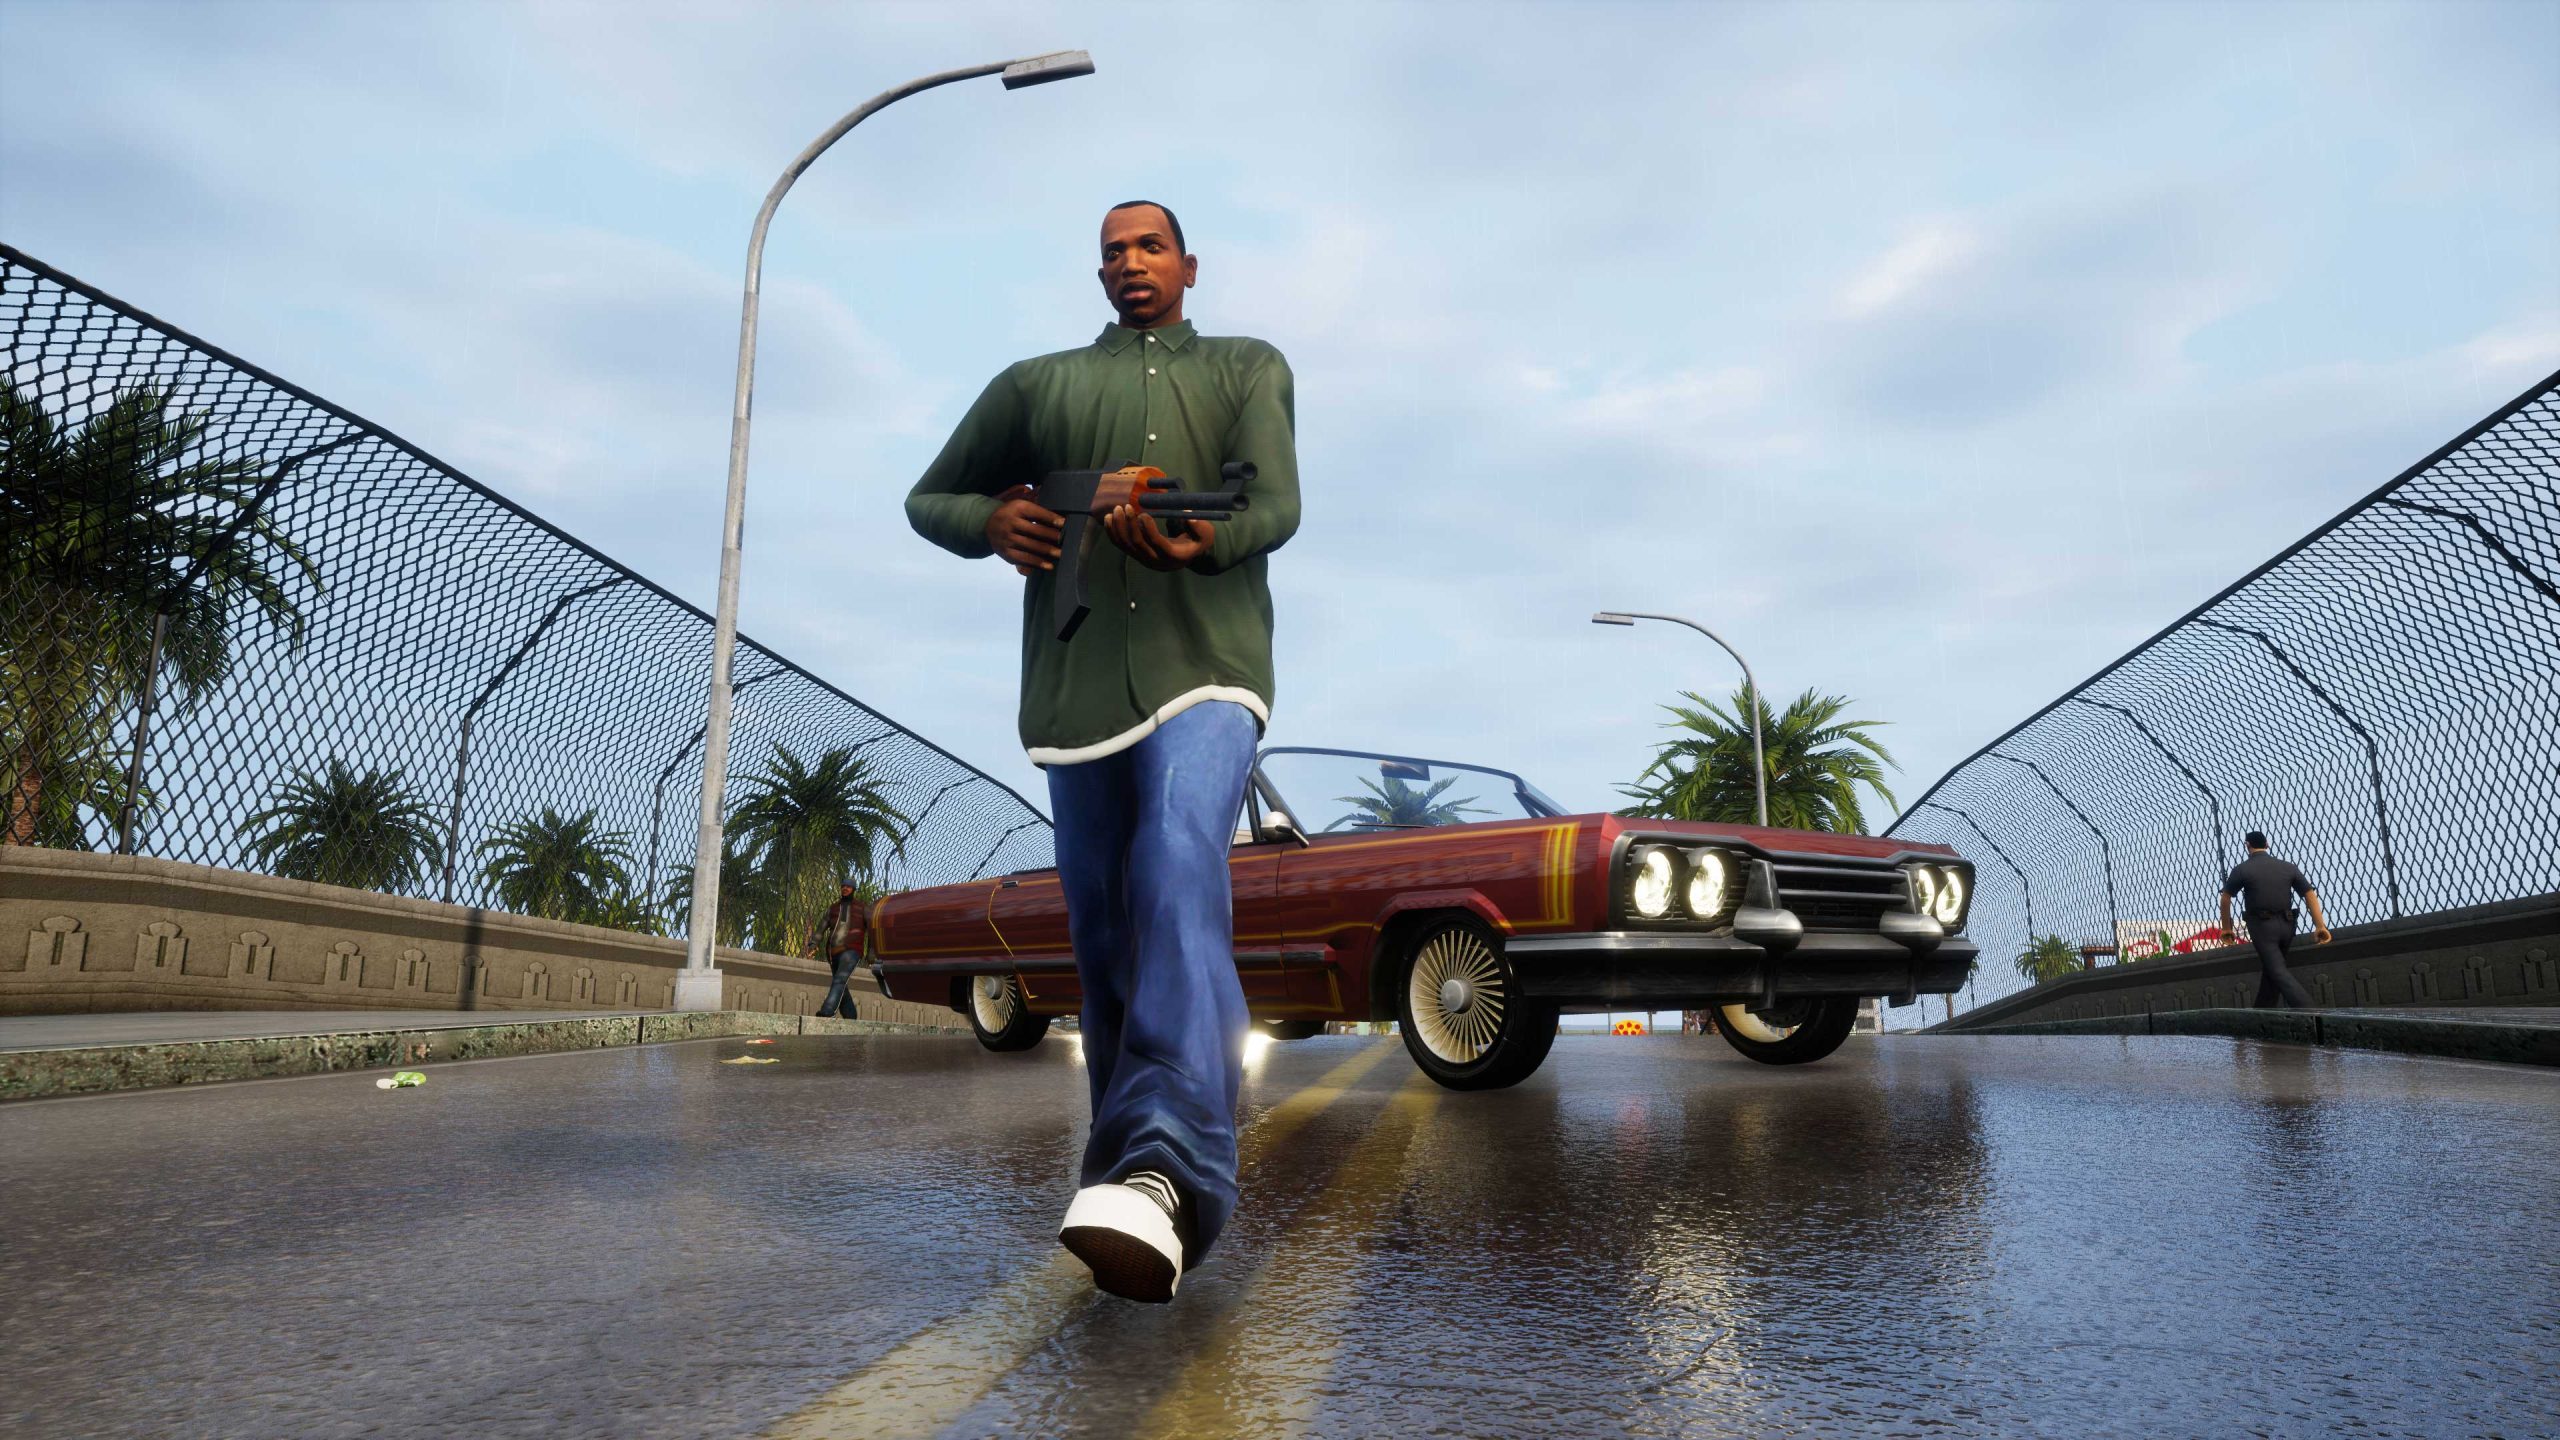 grand-theft-auto-the-trilogy-the-finitive-edition-pc-image-scaled-1158089